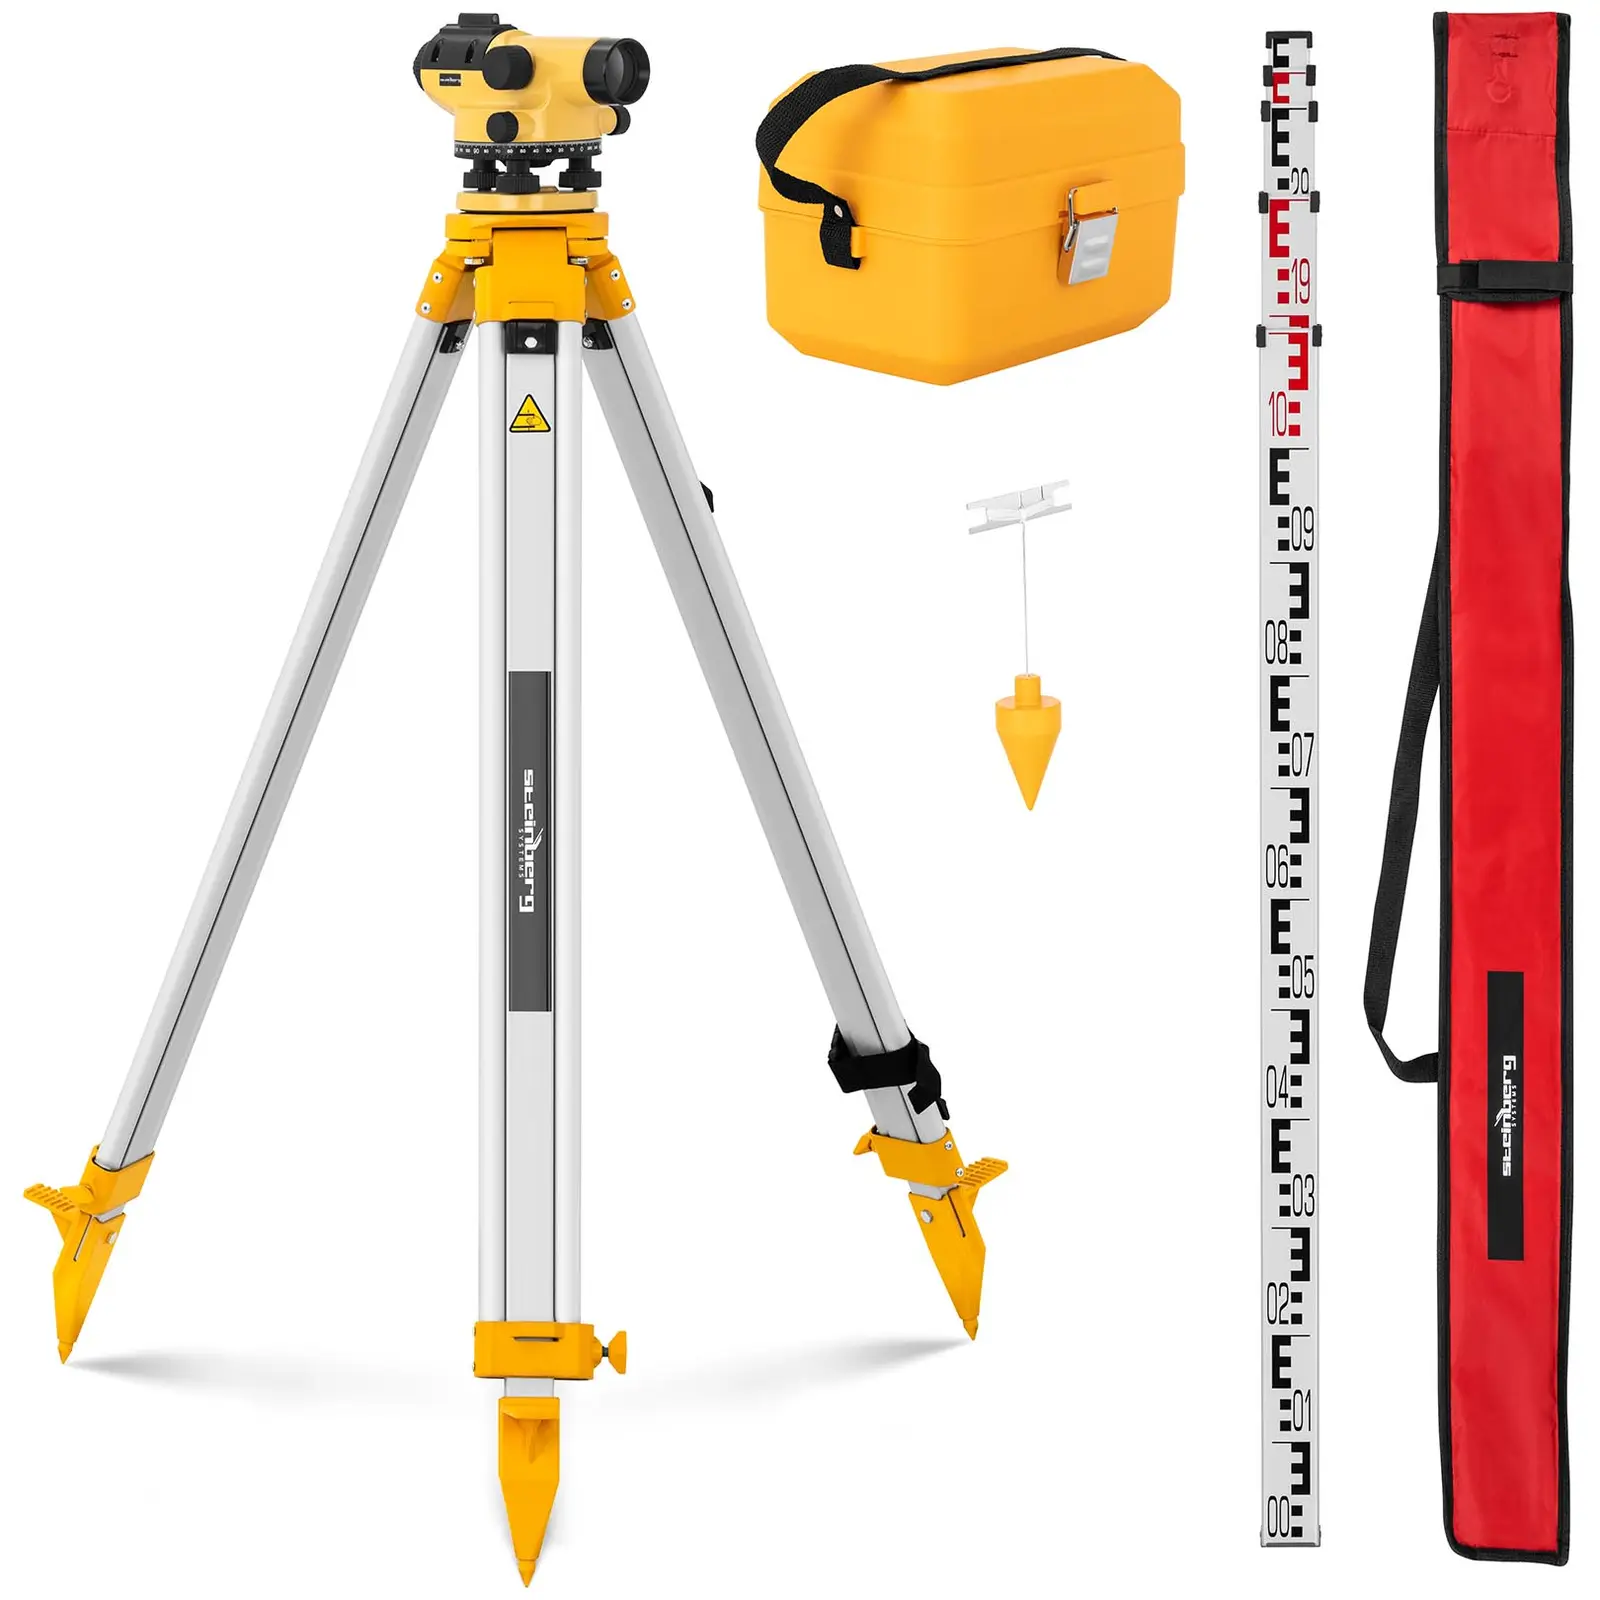 Automatic Level - with tripod and level staff - 32x magnification - 38 mm lens - deviation 1 mm - magnetic compensator